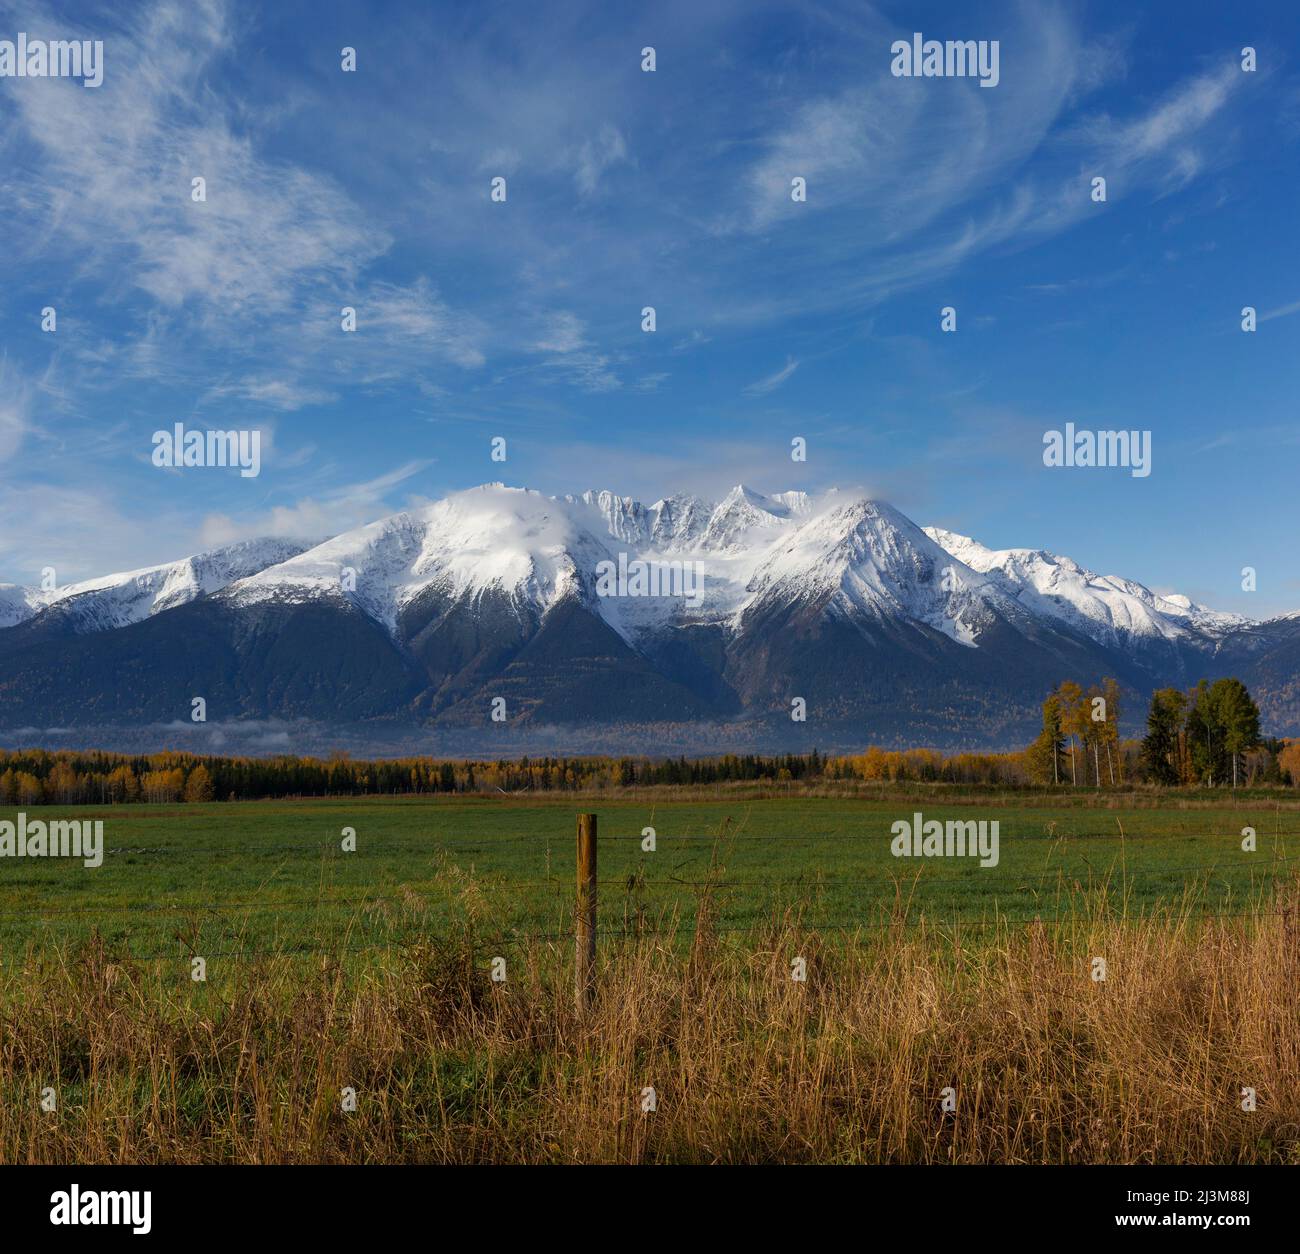 Rugged peaks of a snow-capped Cascade mountain range viewed from a country road and field in Northern British Columbia; British Columbia, Canada Stock Photo